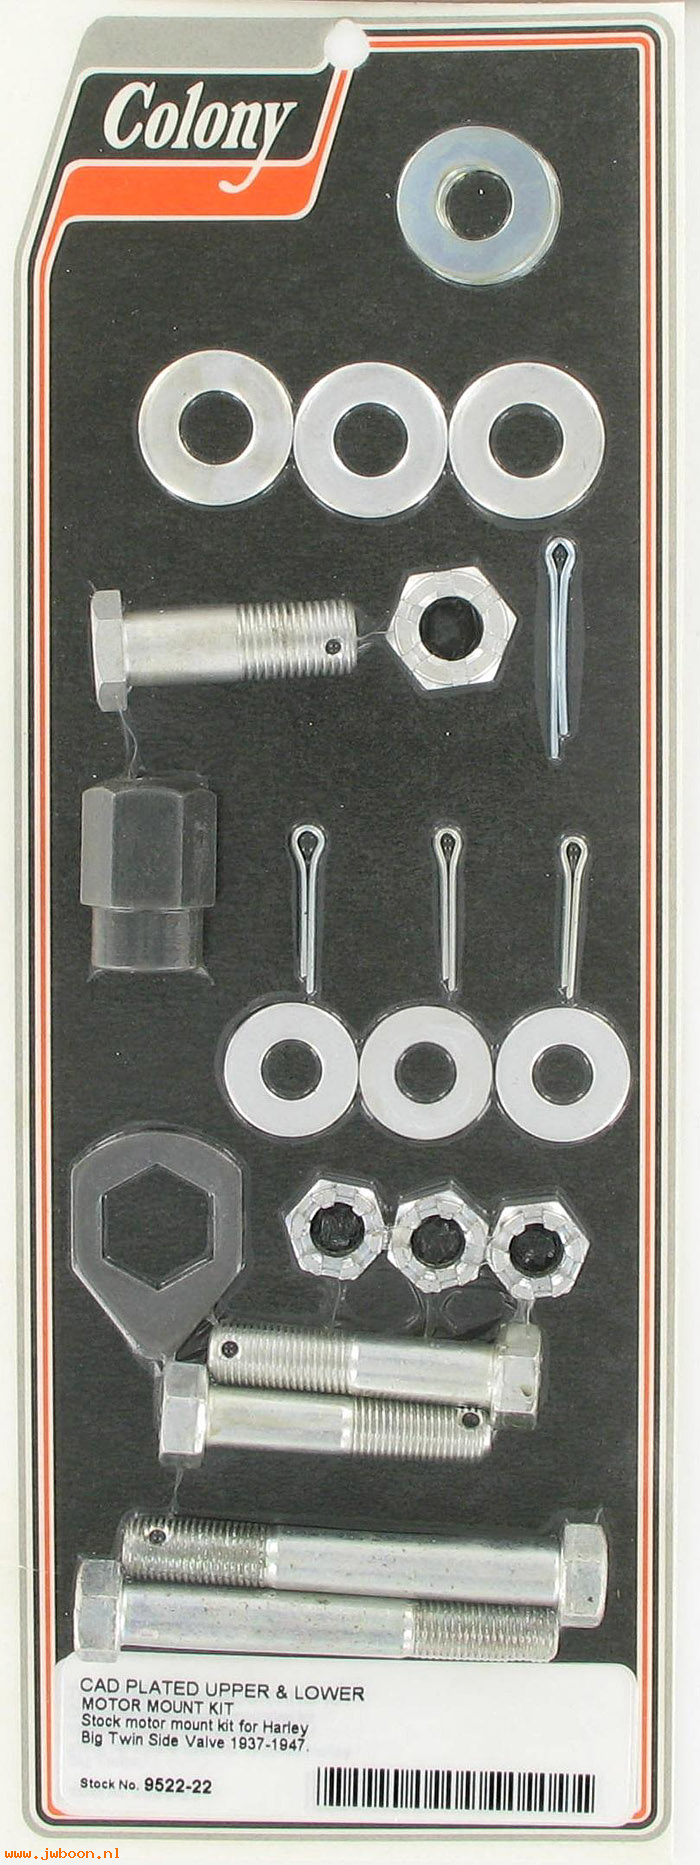 C 9522-22 (24791-36 / 4379): Upper and lower motor mount kit - UL '37-'47, in stock, Colony